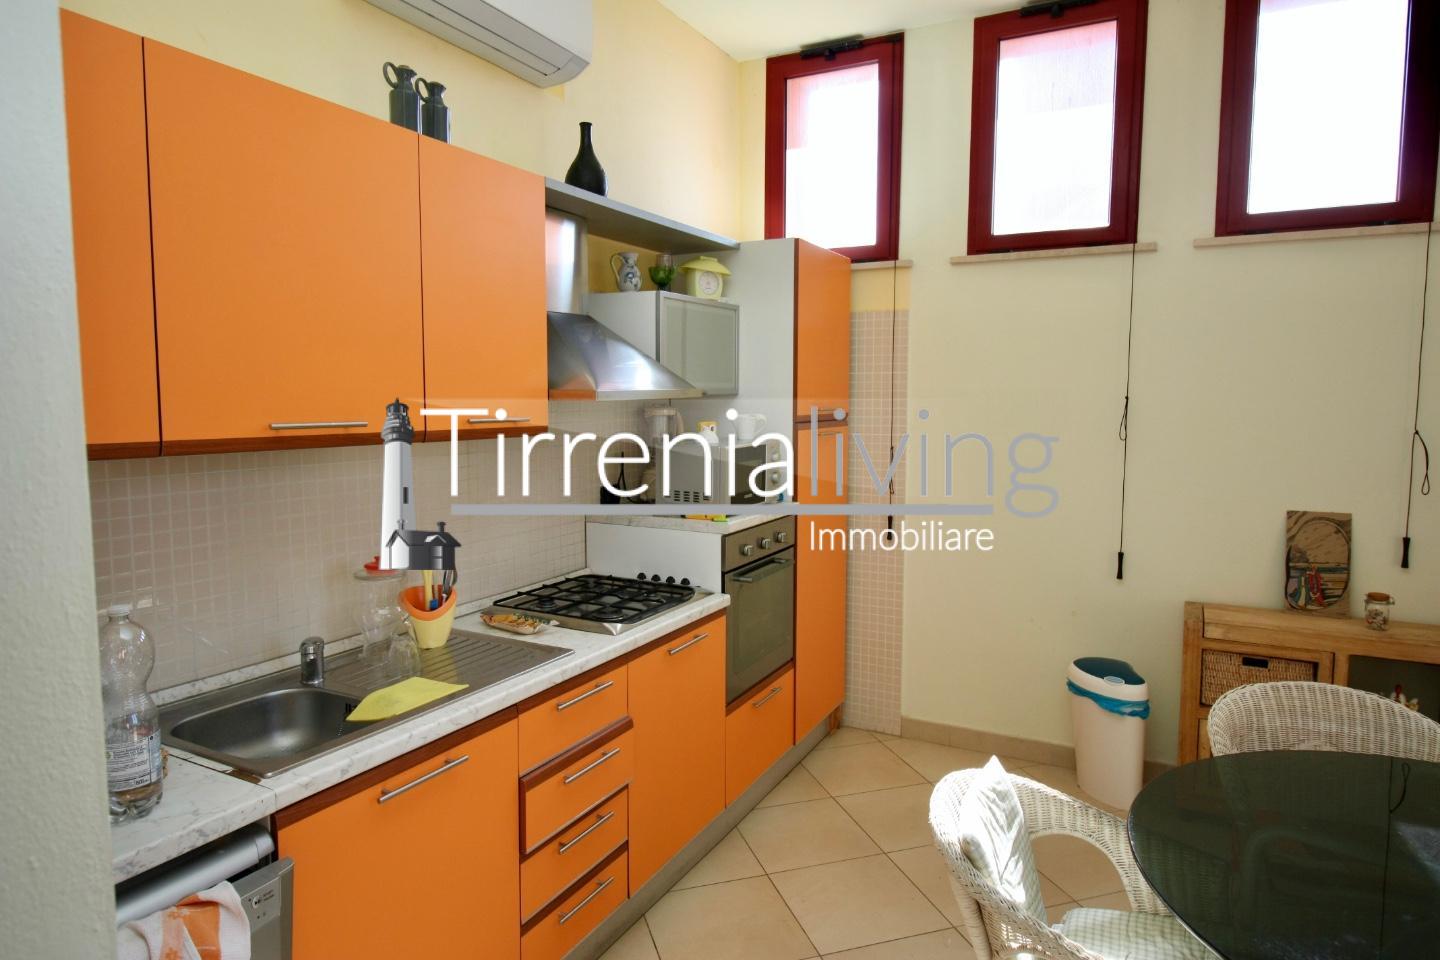 Apartment for holiday rentals, ref. A-517